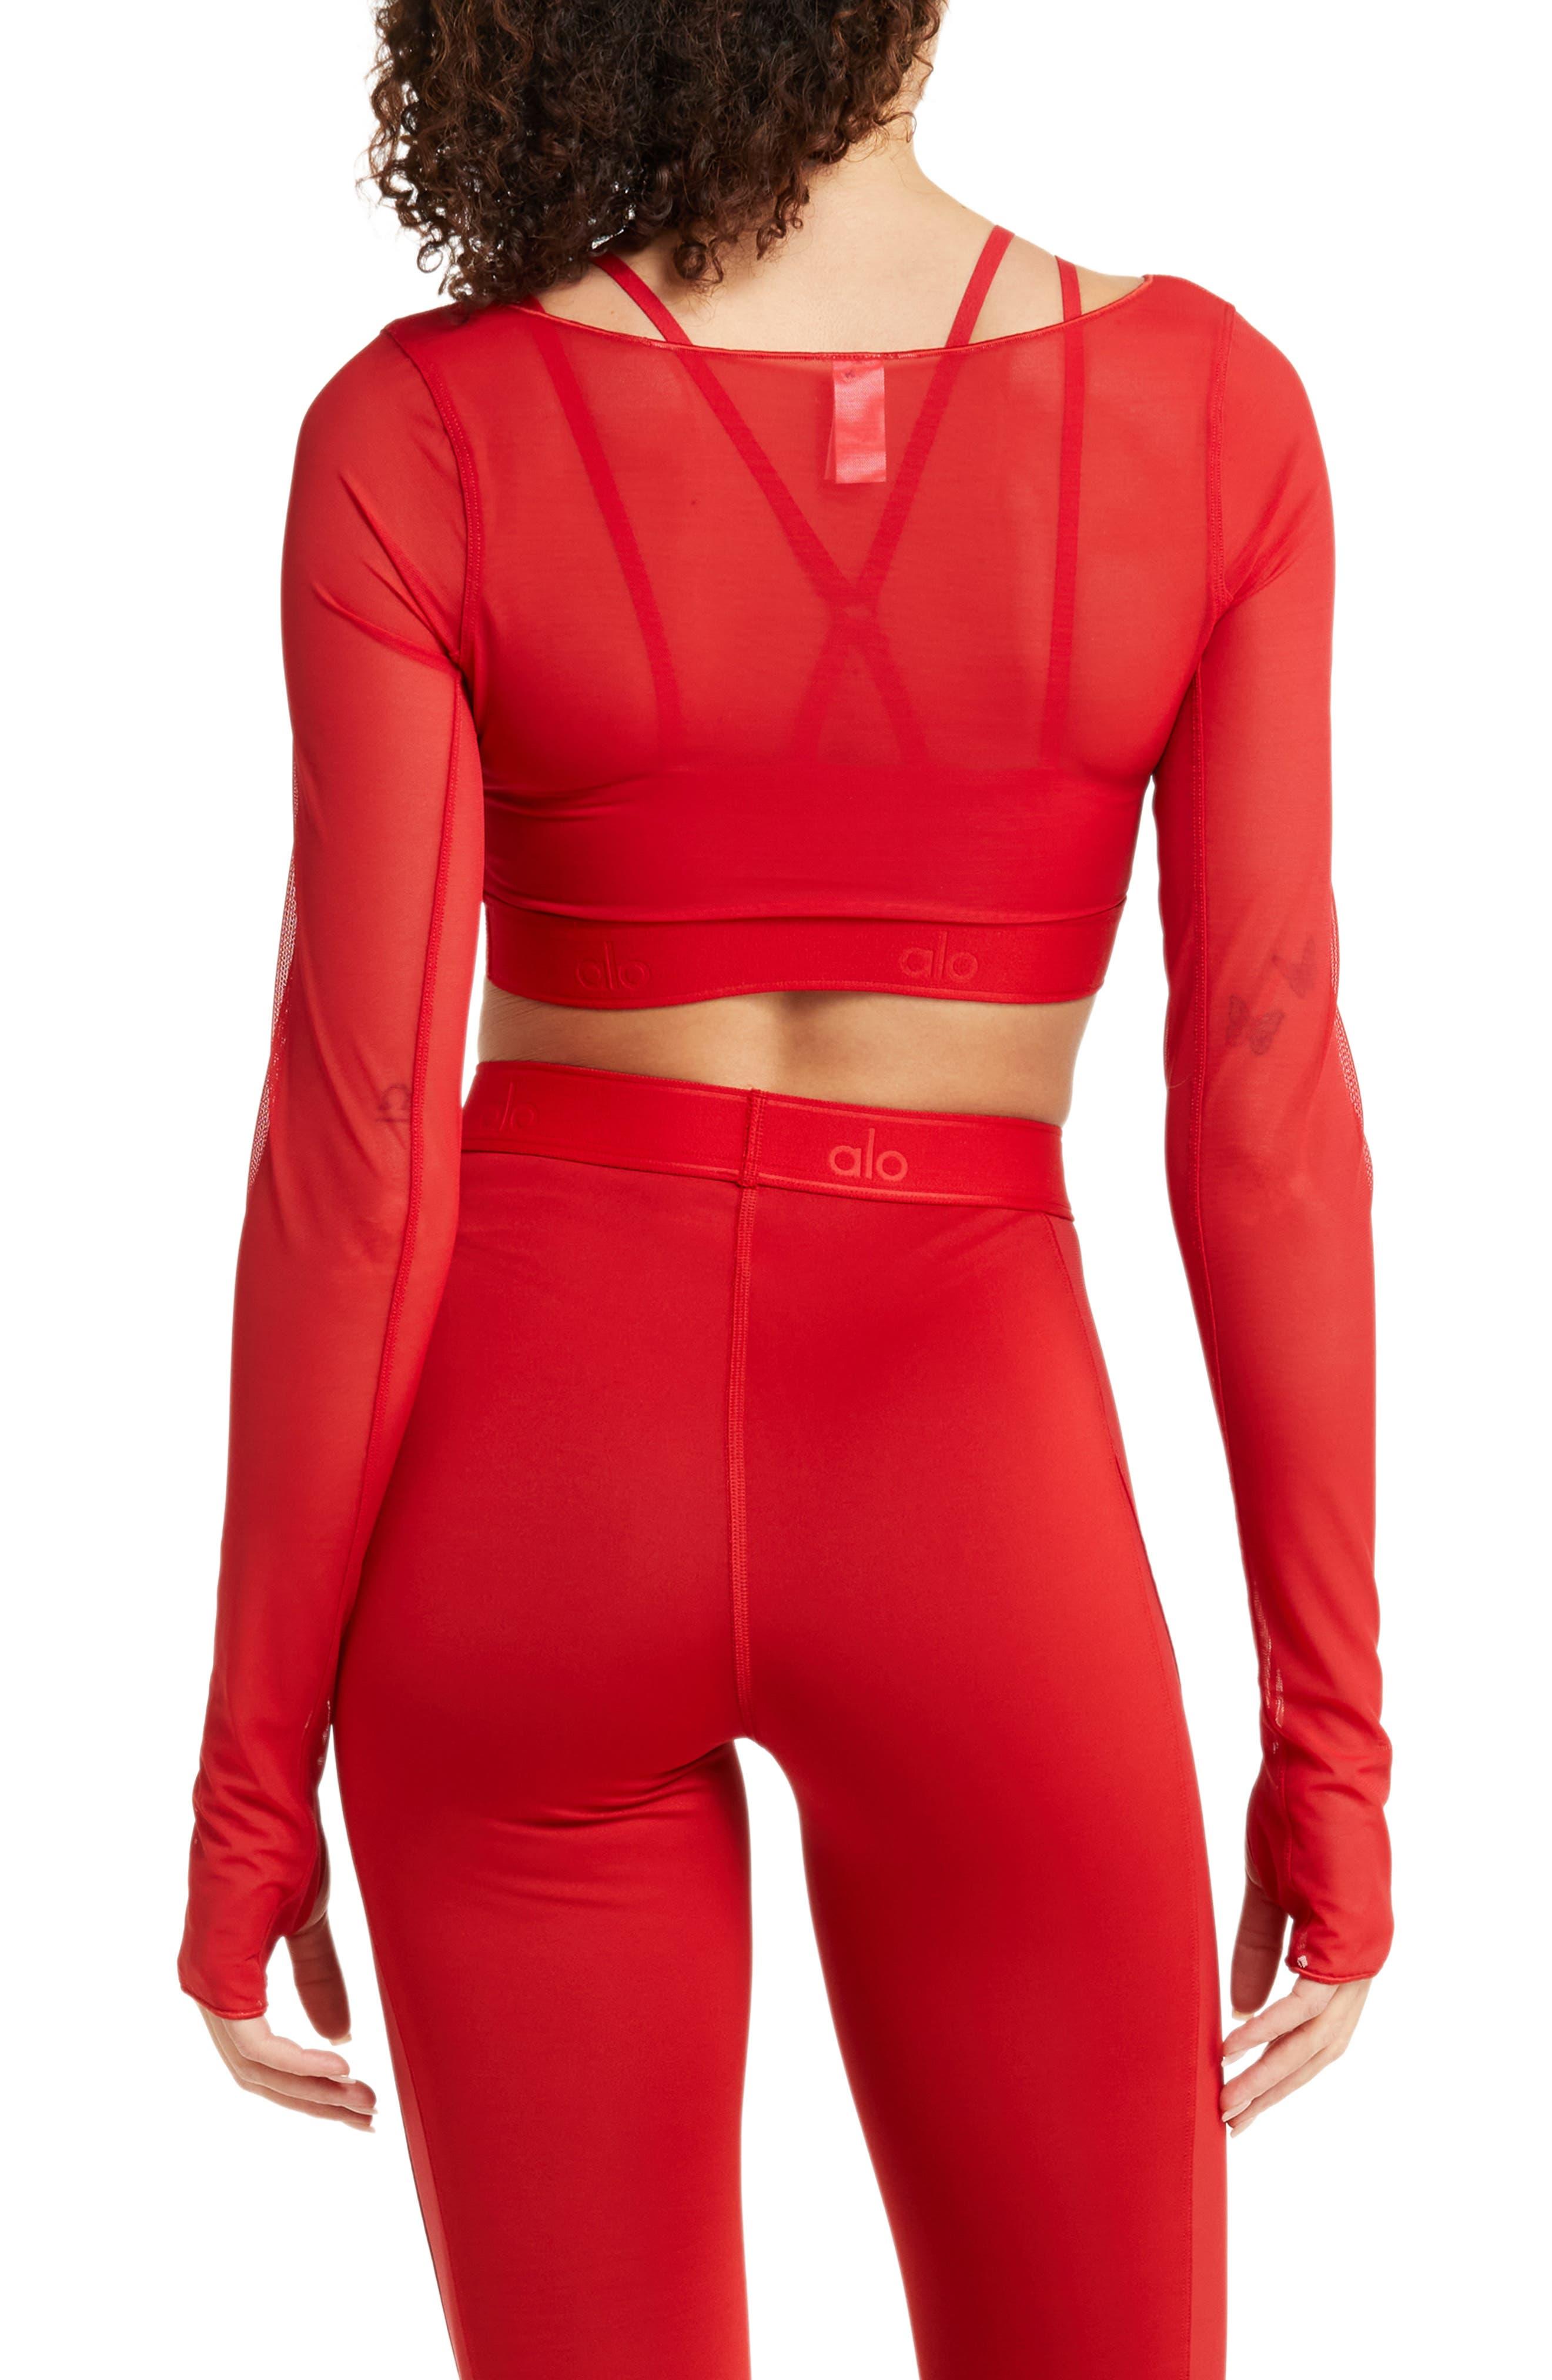 Alo Yoga Airlift Ballet Dream Long Sleeve Bra Top in Red | Lyst